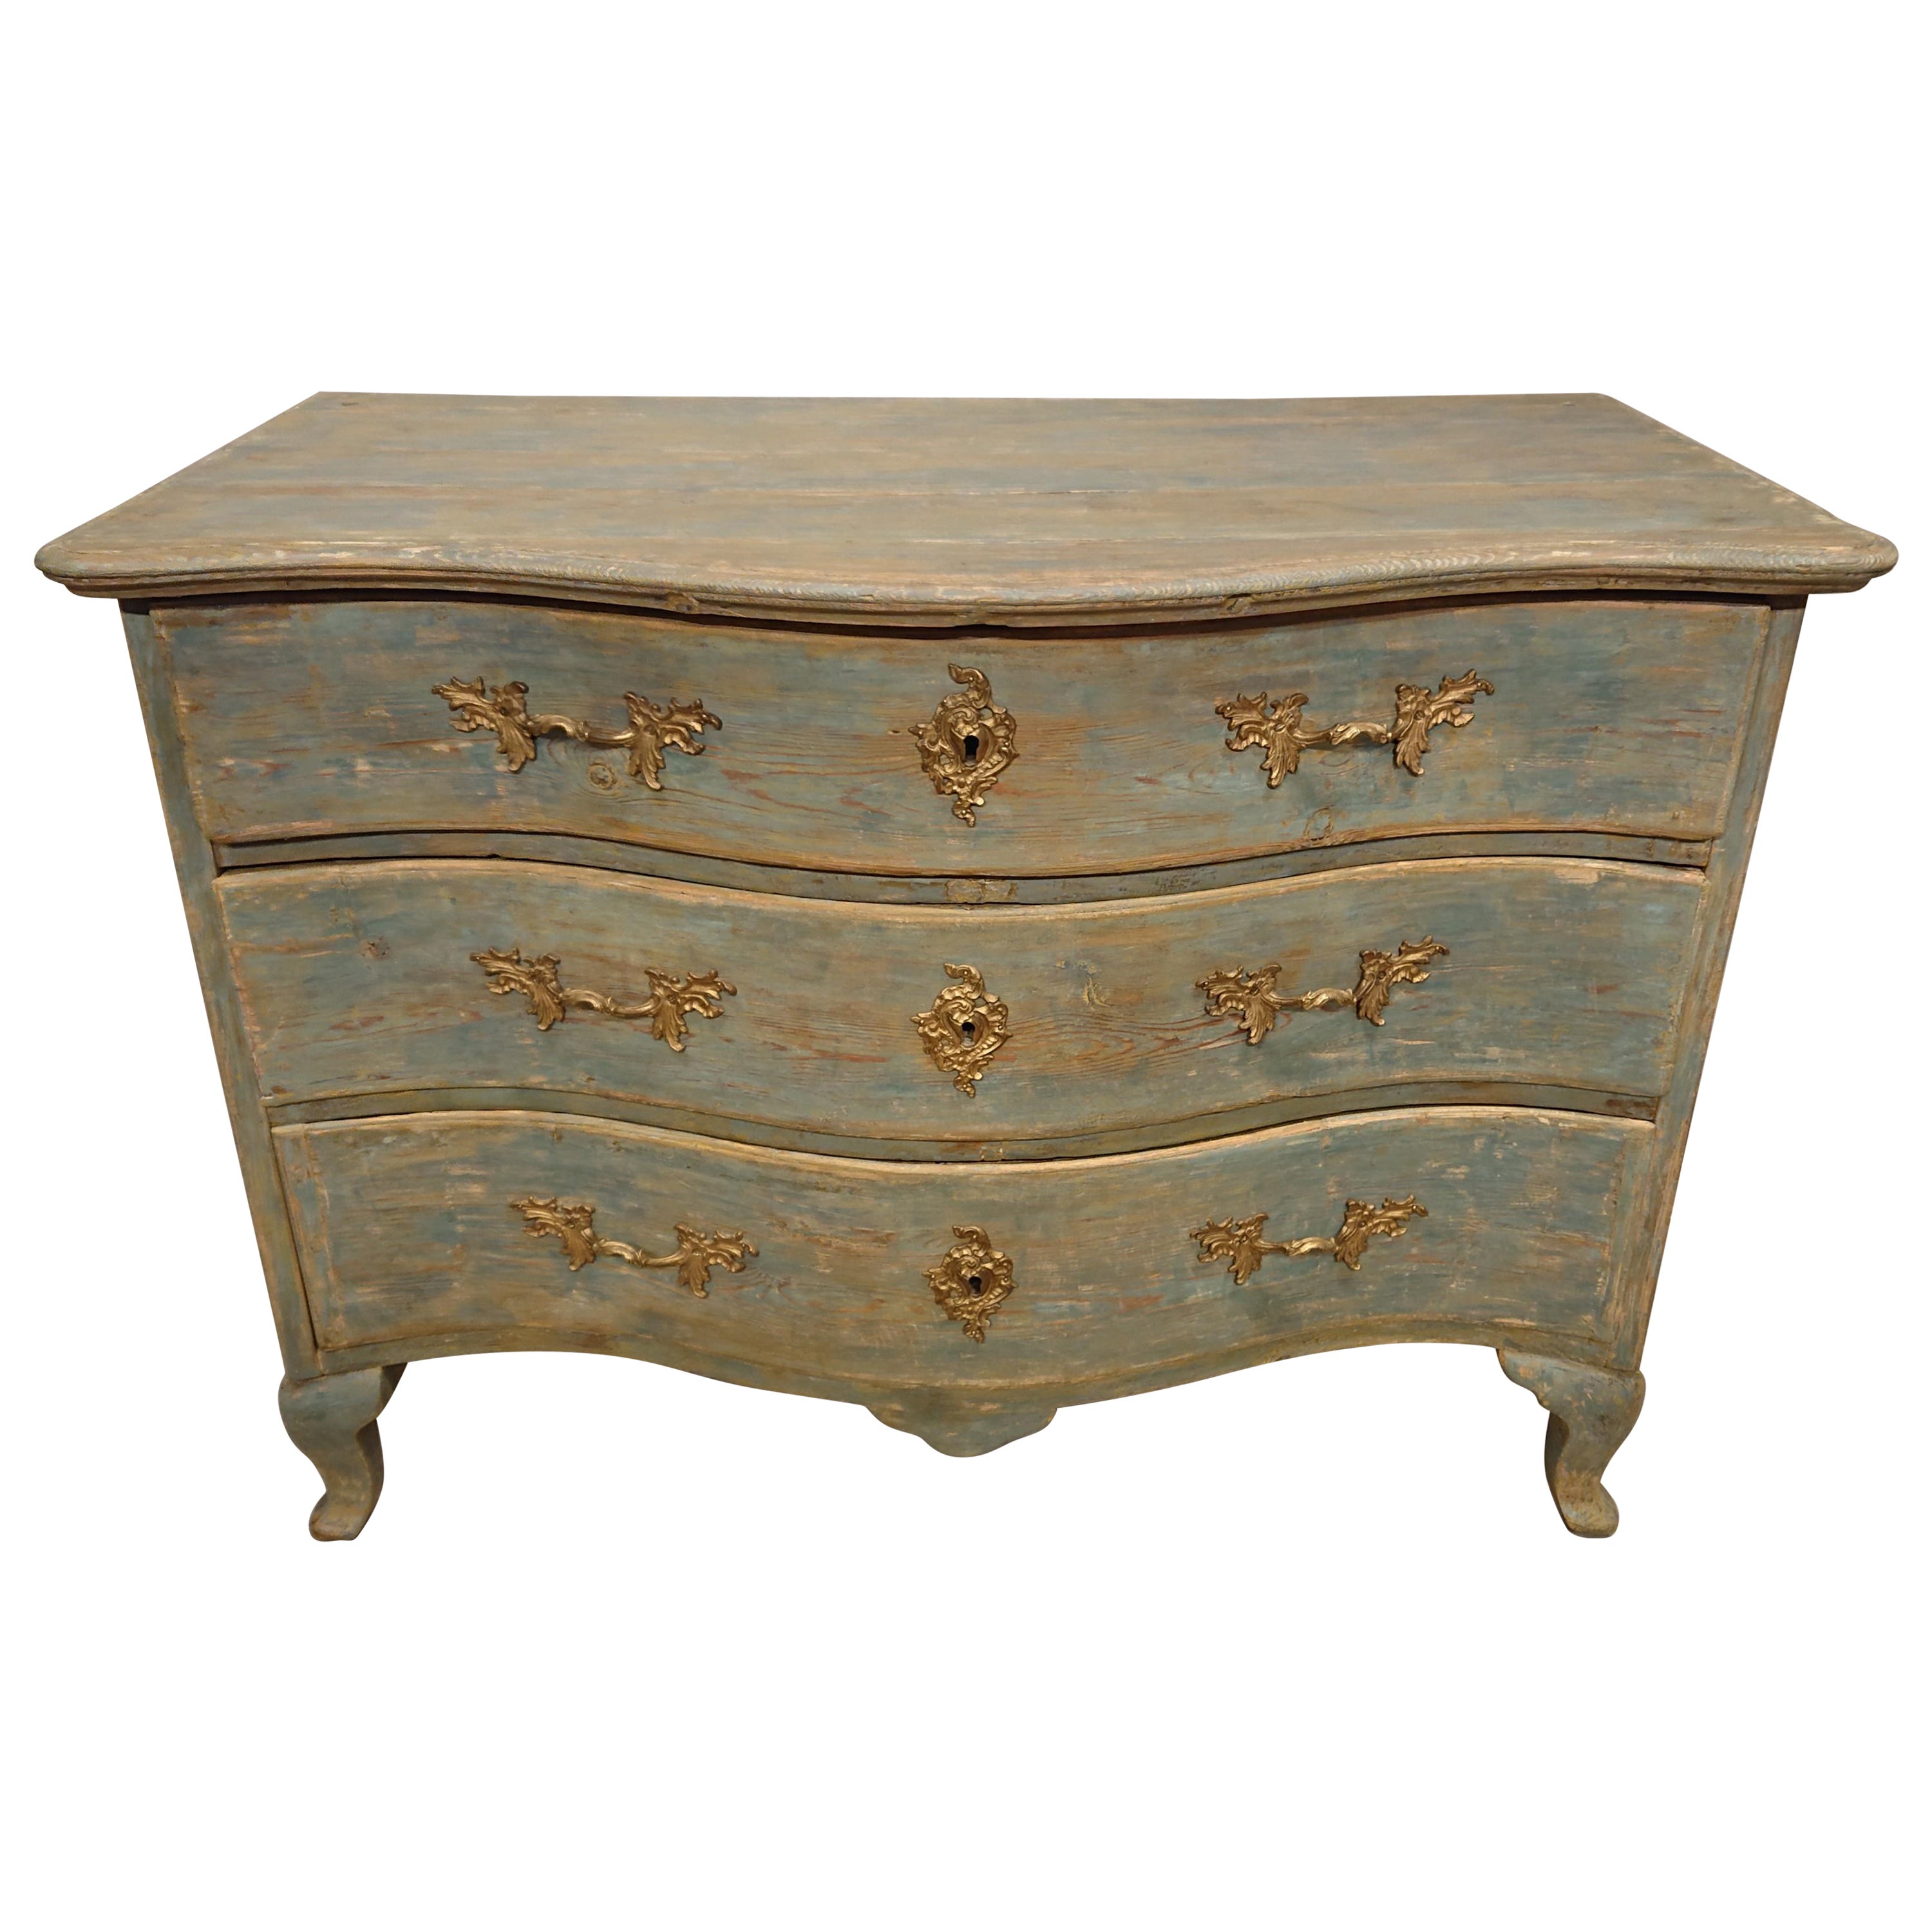 18th Century Swedish Rococo Chest of Drawers from Northern Sweden